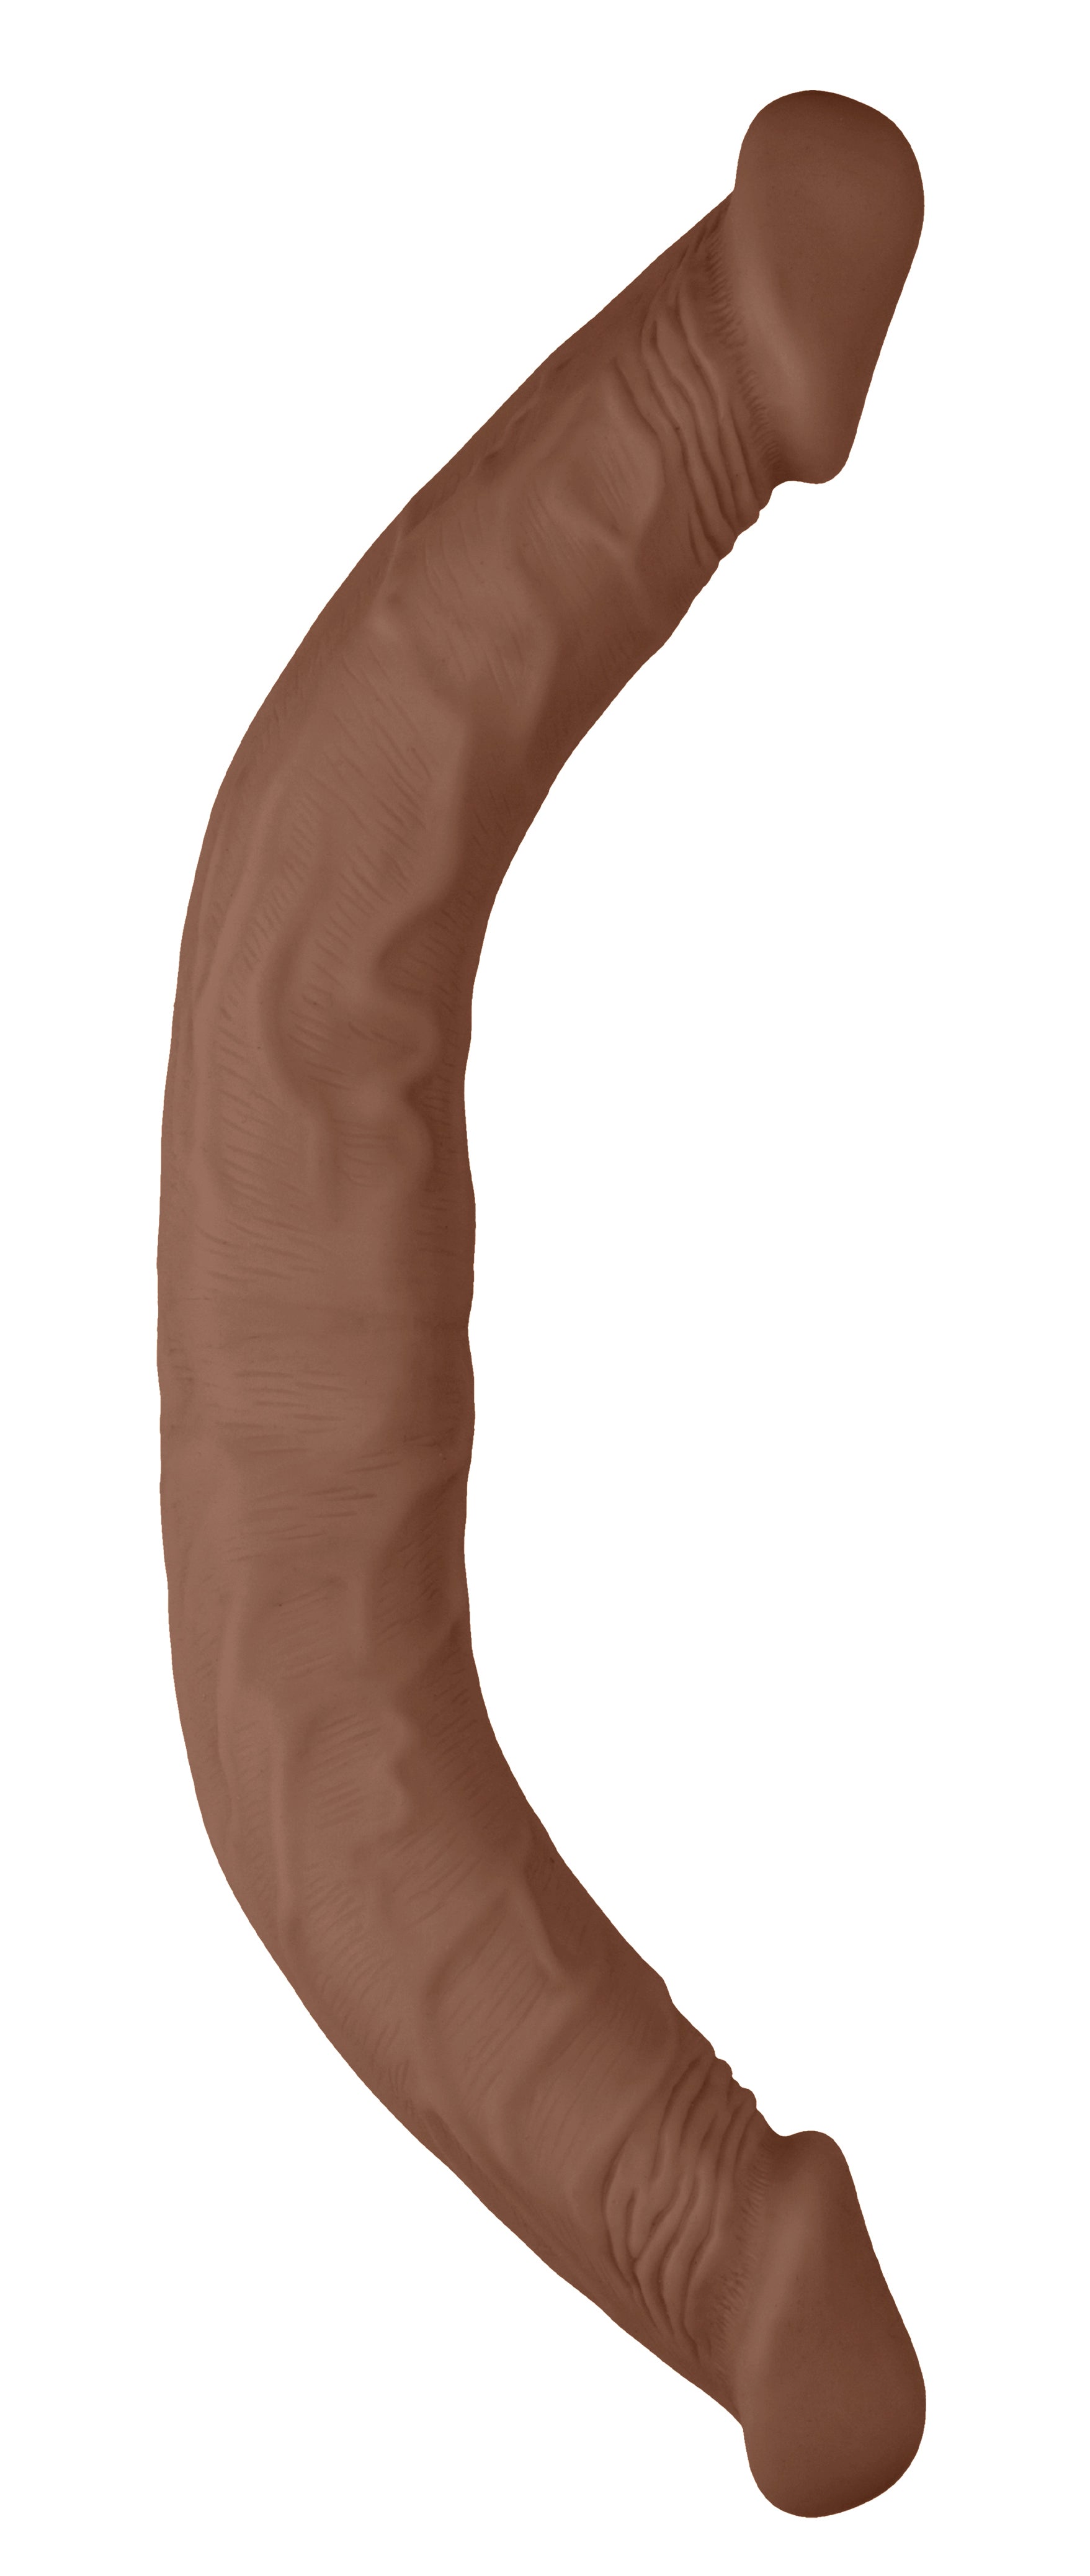 18 Inch Double Dong - Tan